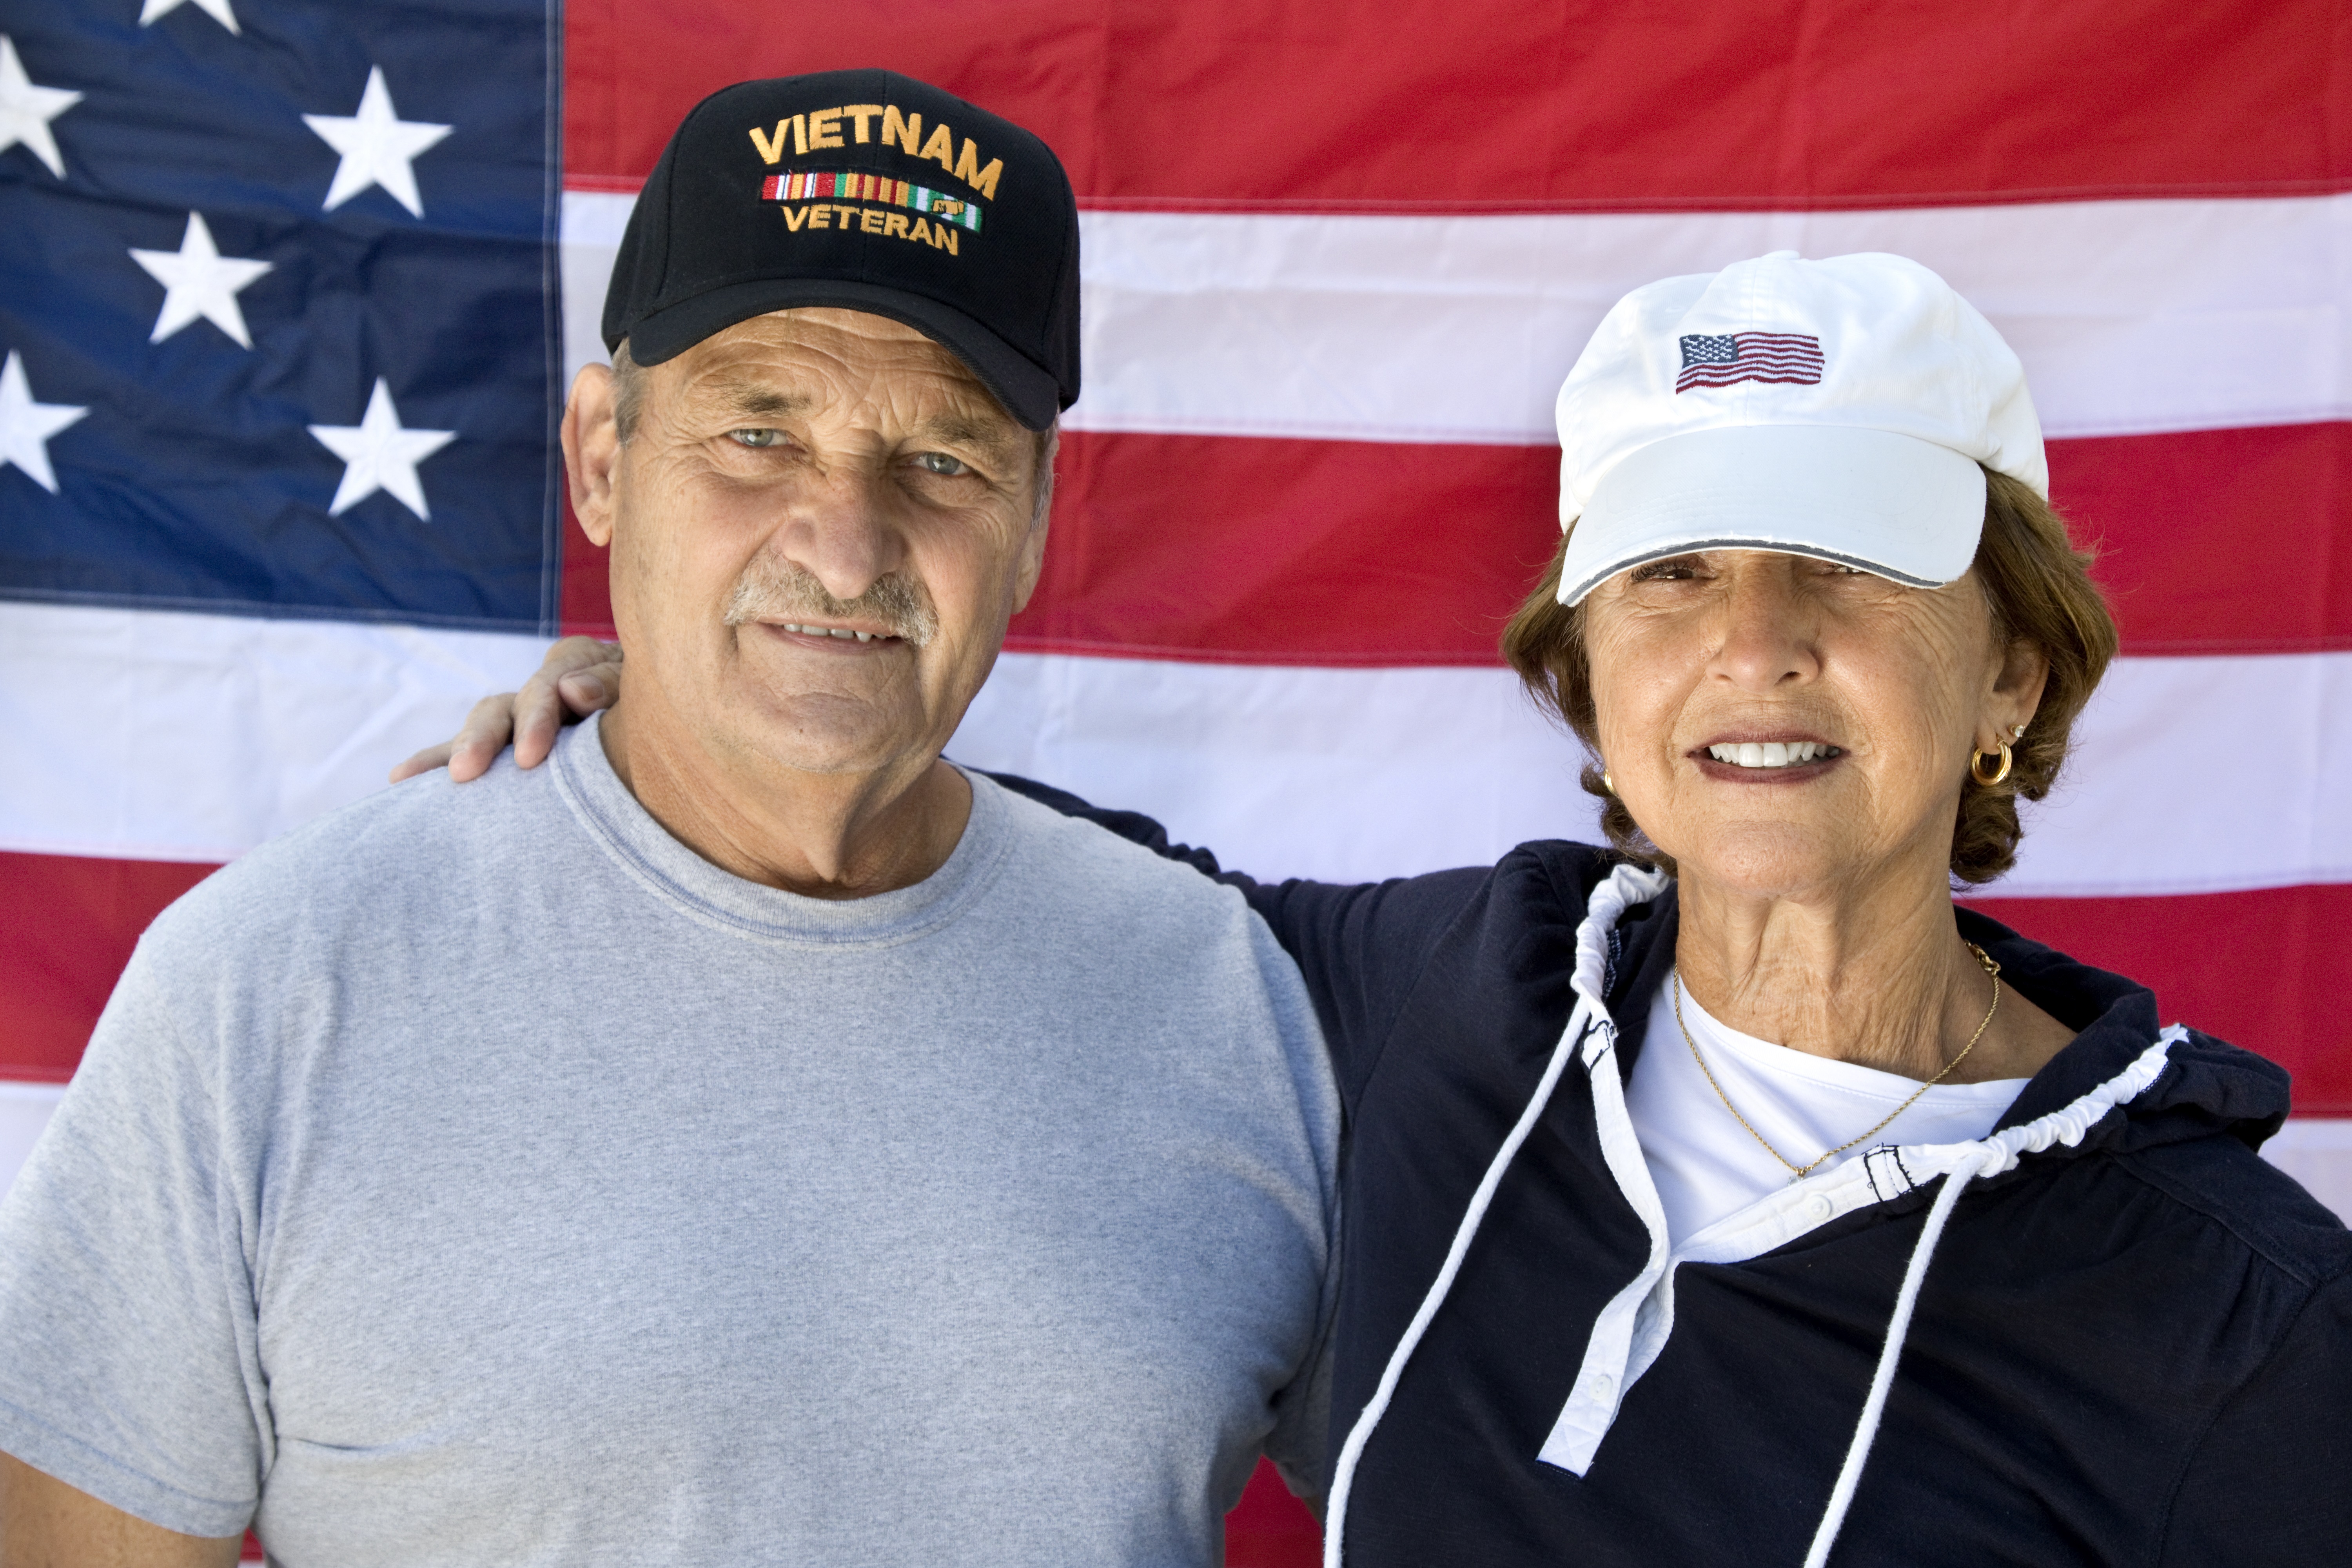 Vietnam Veteran and Wife looking at camera with American Flag in background